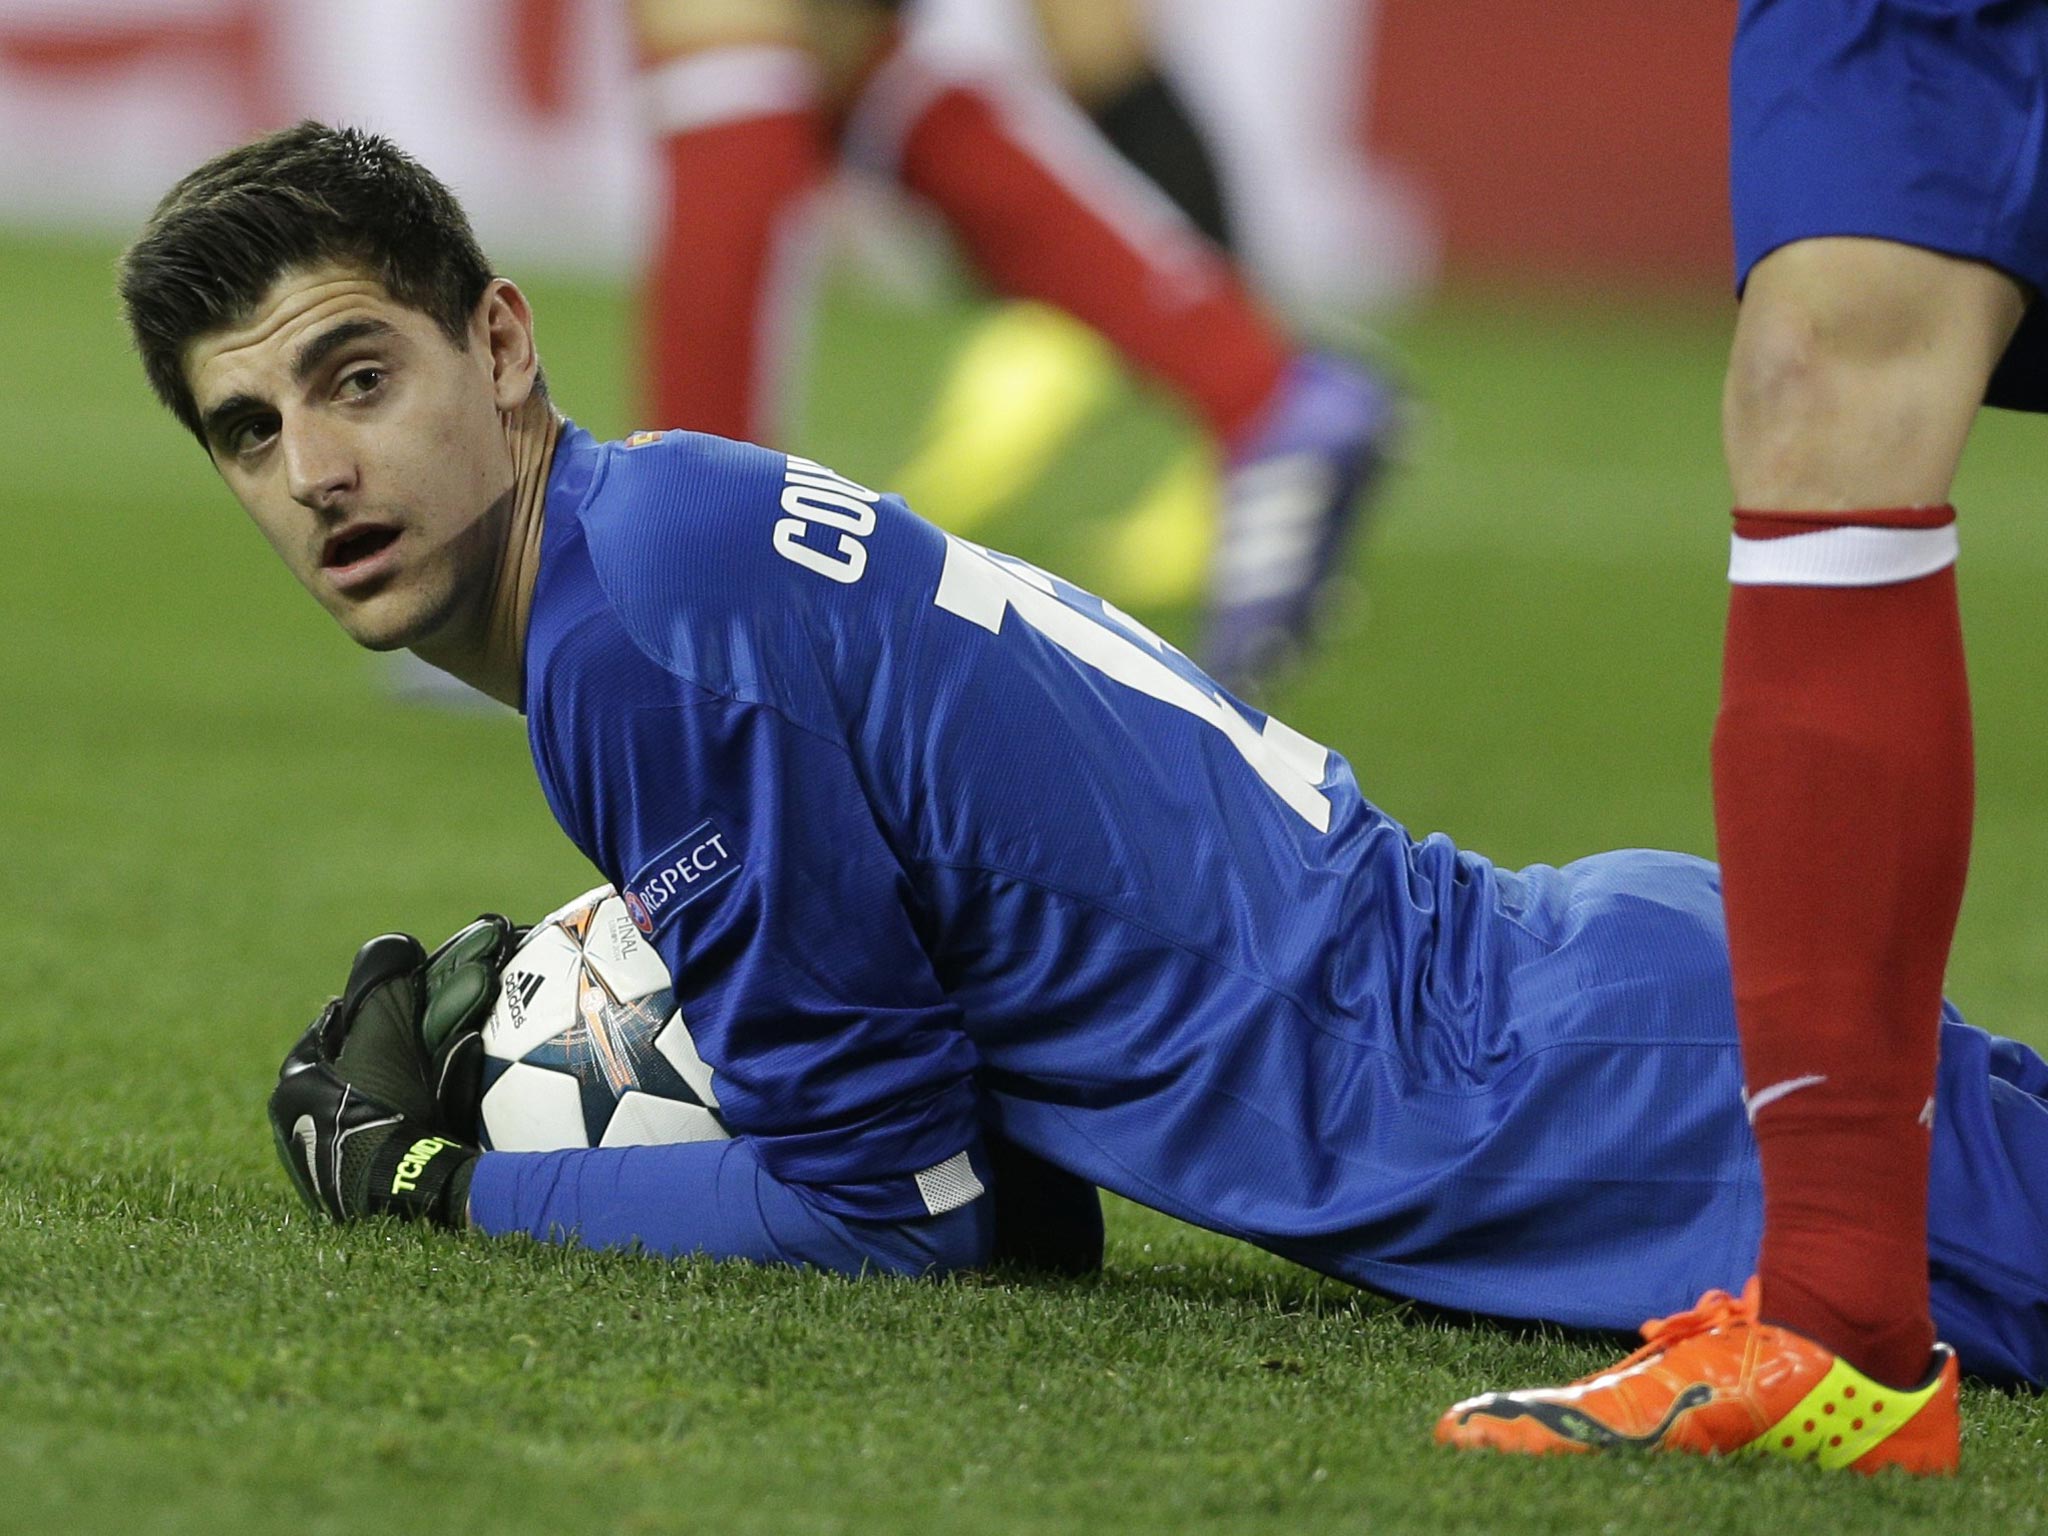 Atletico goalkeeper Thibaut Courtois is expected to face Chelsea, who he is on loan from